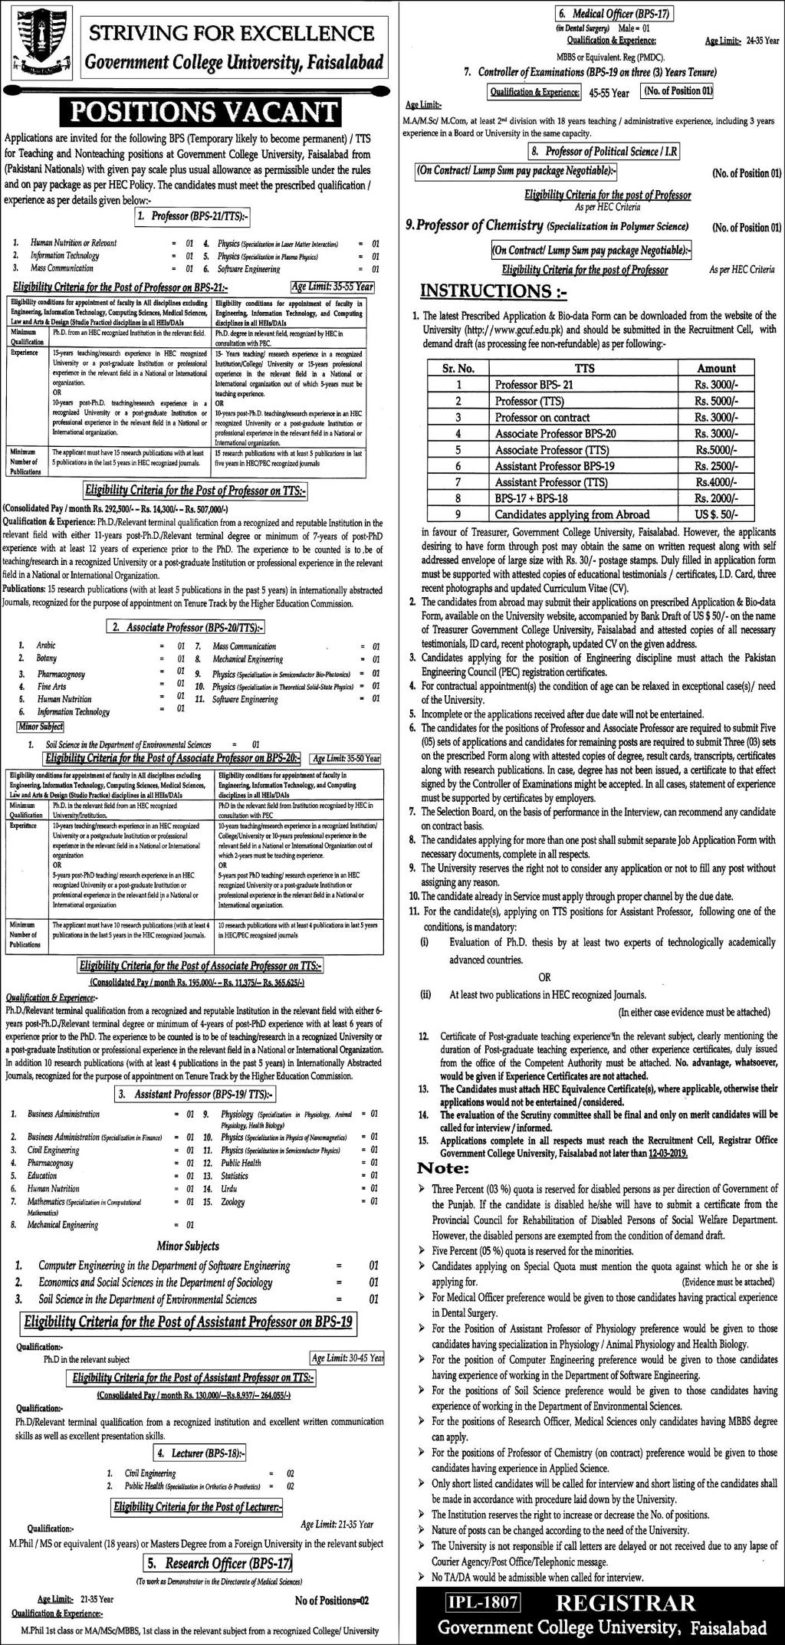 Government College University Faisalabad Jobs 2019 for 45+ Admin, Medical, Research & Teaching Faculty